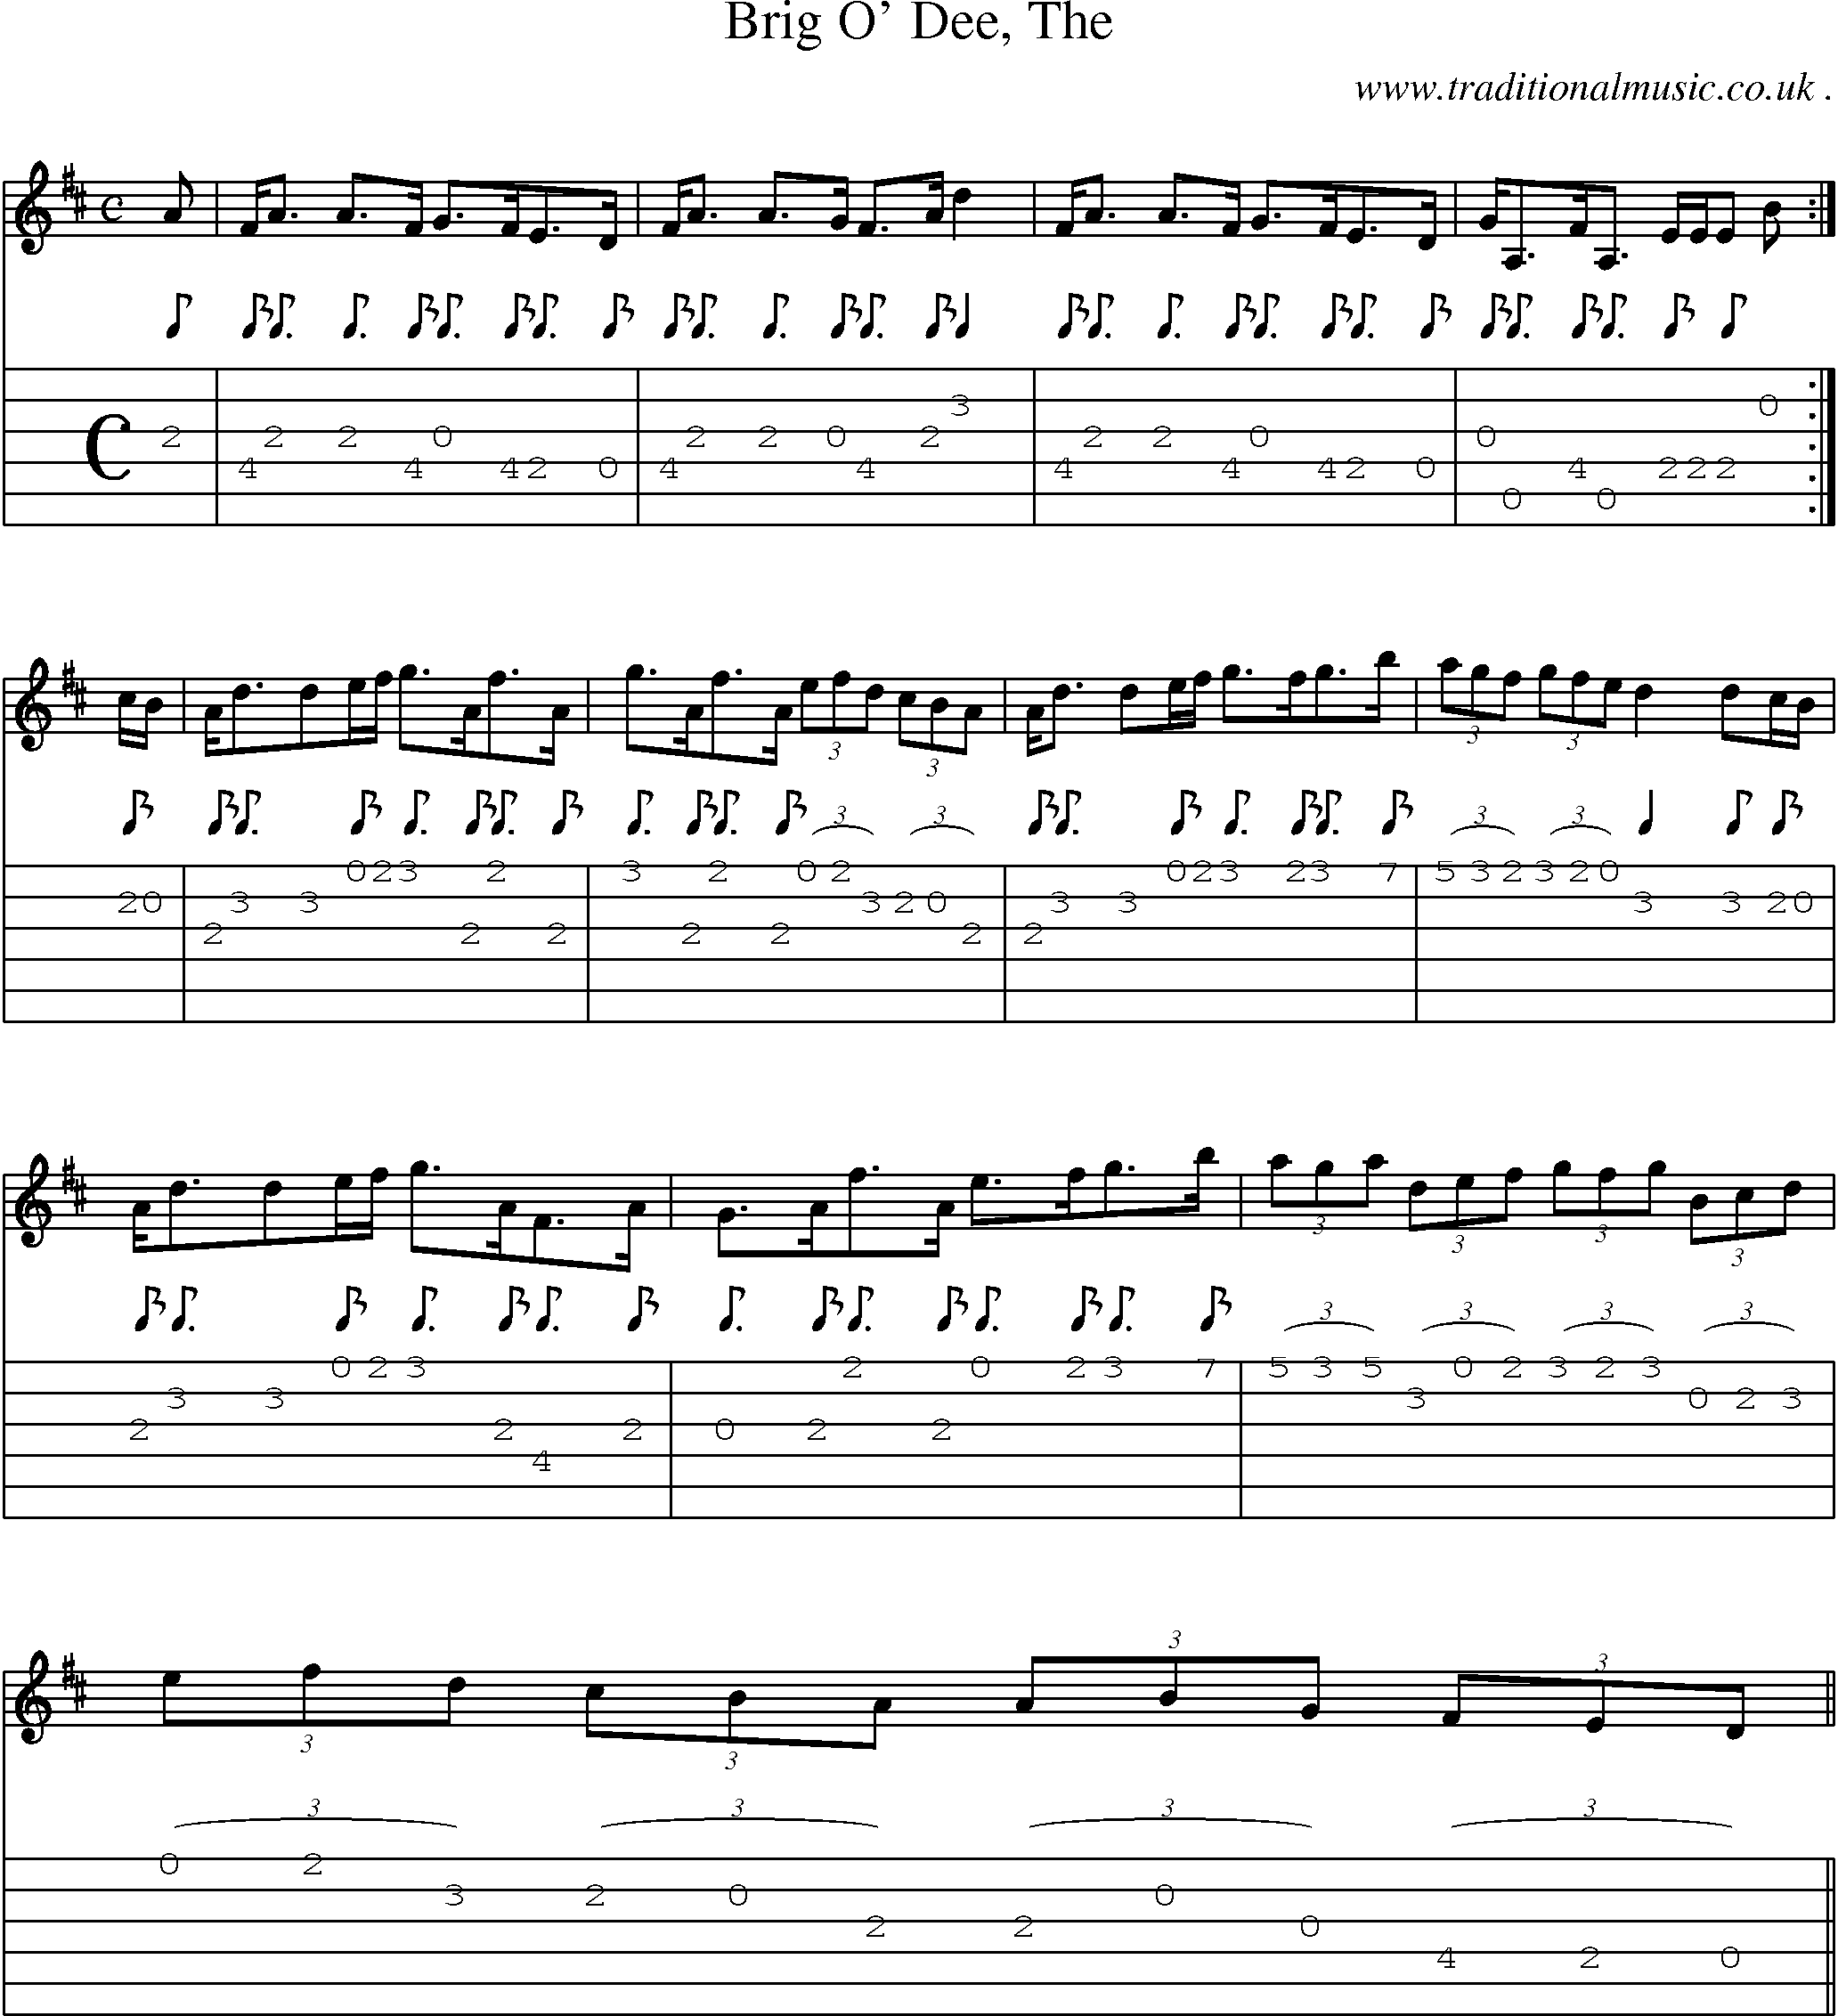 Sheet-music  score, Chords and Guitar Tabs for Brig O Dee The